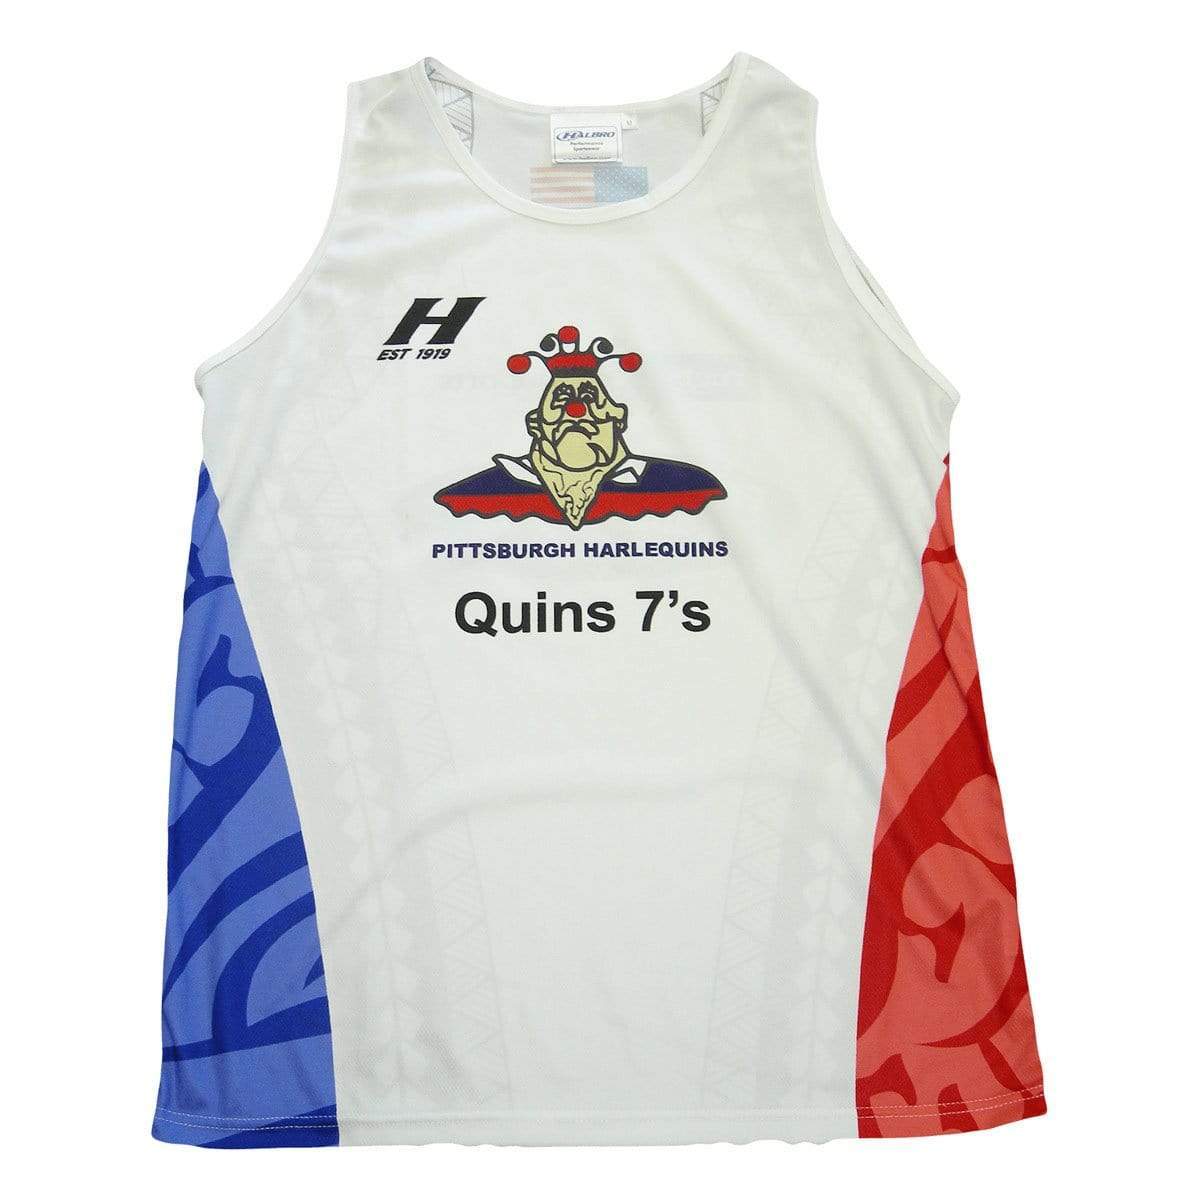 Get latest Men's Custom Sublimated Performance Fit (Tight) Rugby